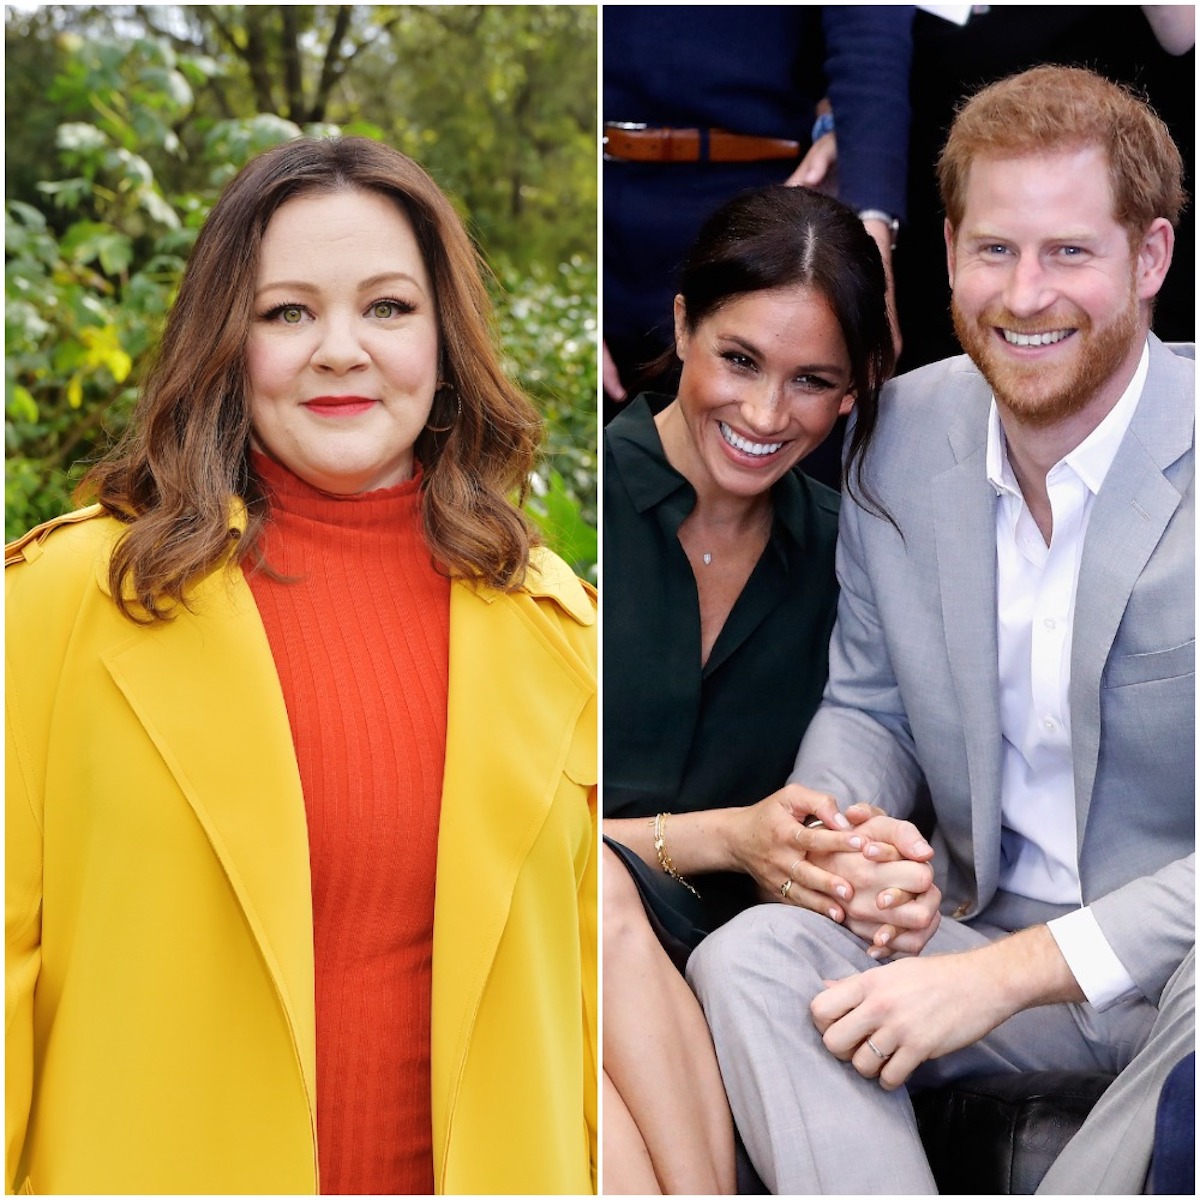 Melissa McCarthy smiles in a red and yellow outfit in 2019; Meghan Markle and Prince Harry smile and hold hands in 2018